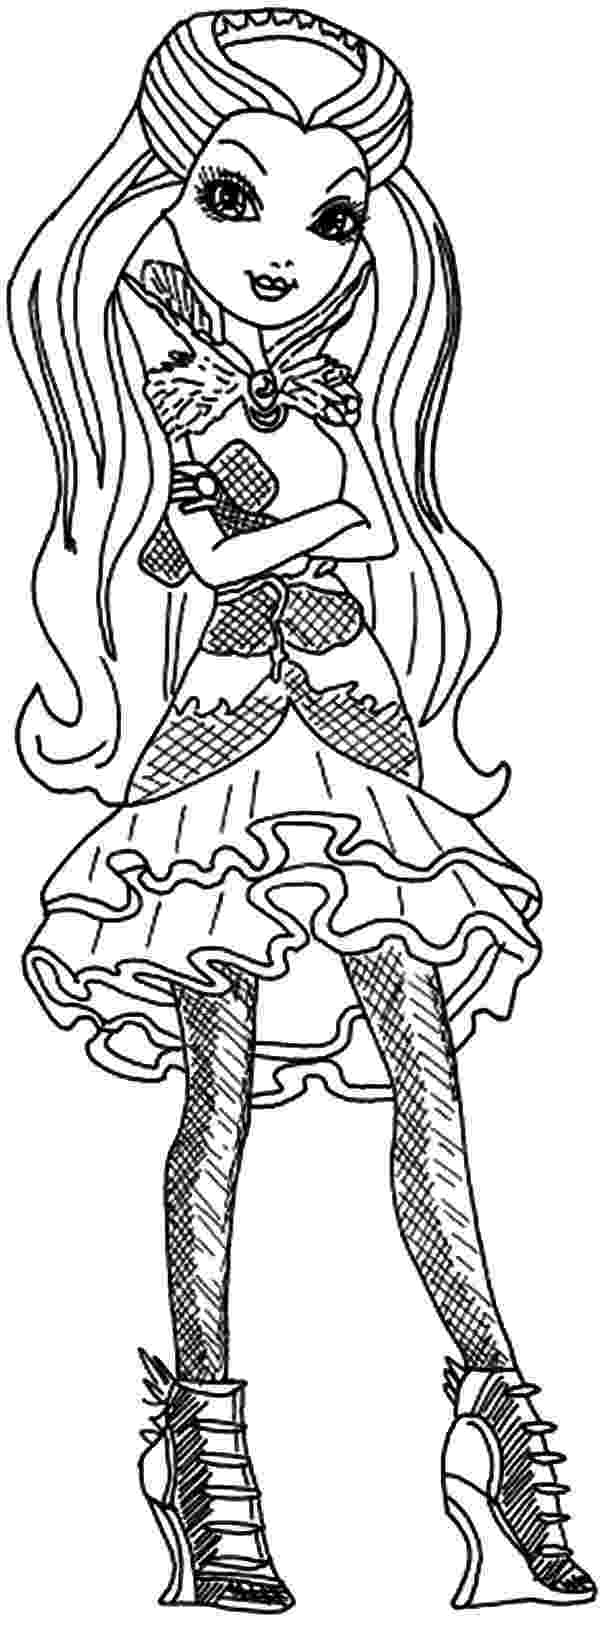 free ever after high printables ever after high lovely raven queen coloring pages ever printables after high free 